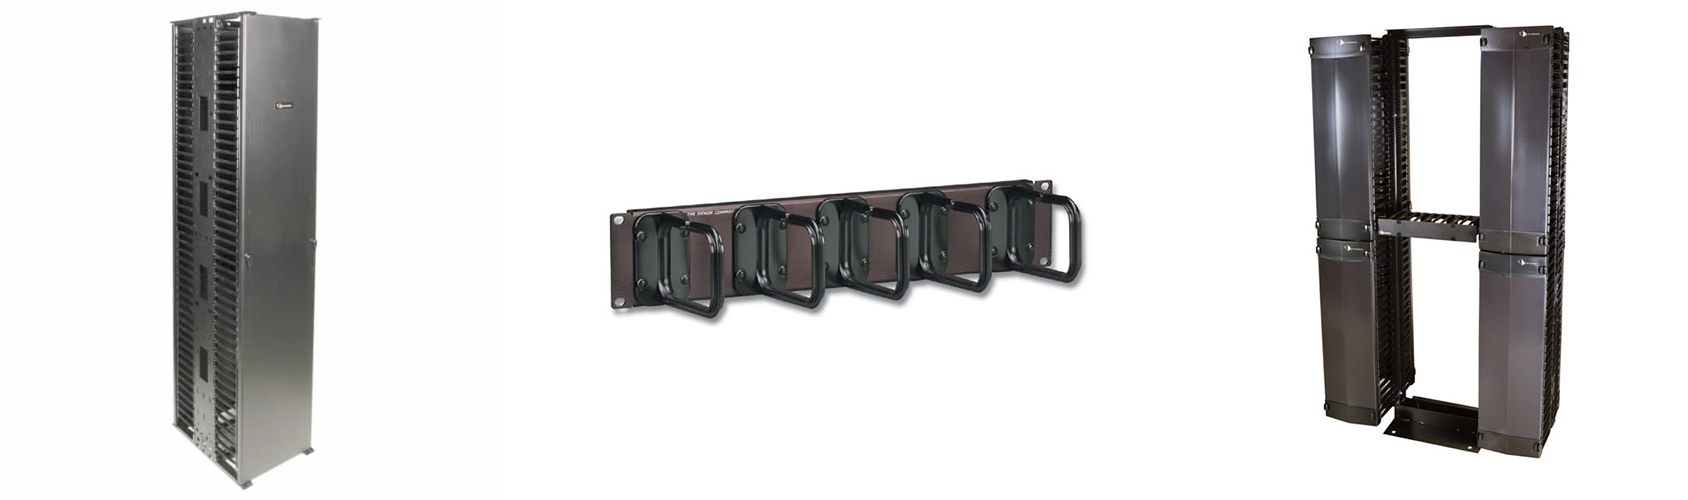 Siemon Interconnect Solutions offers cable management solutions including multi-compartment cabinets